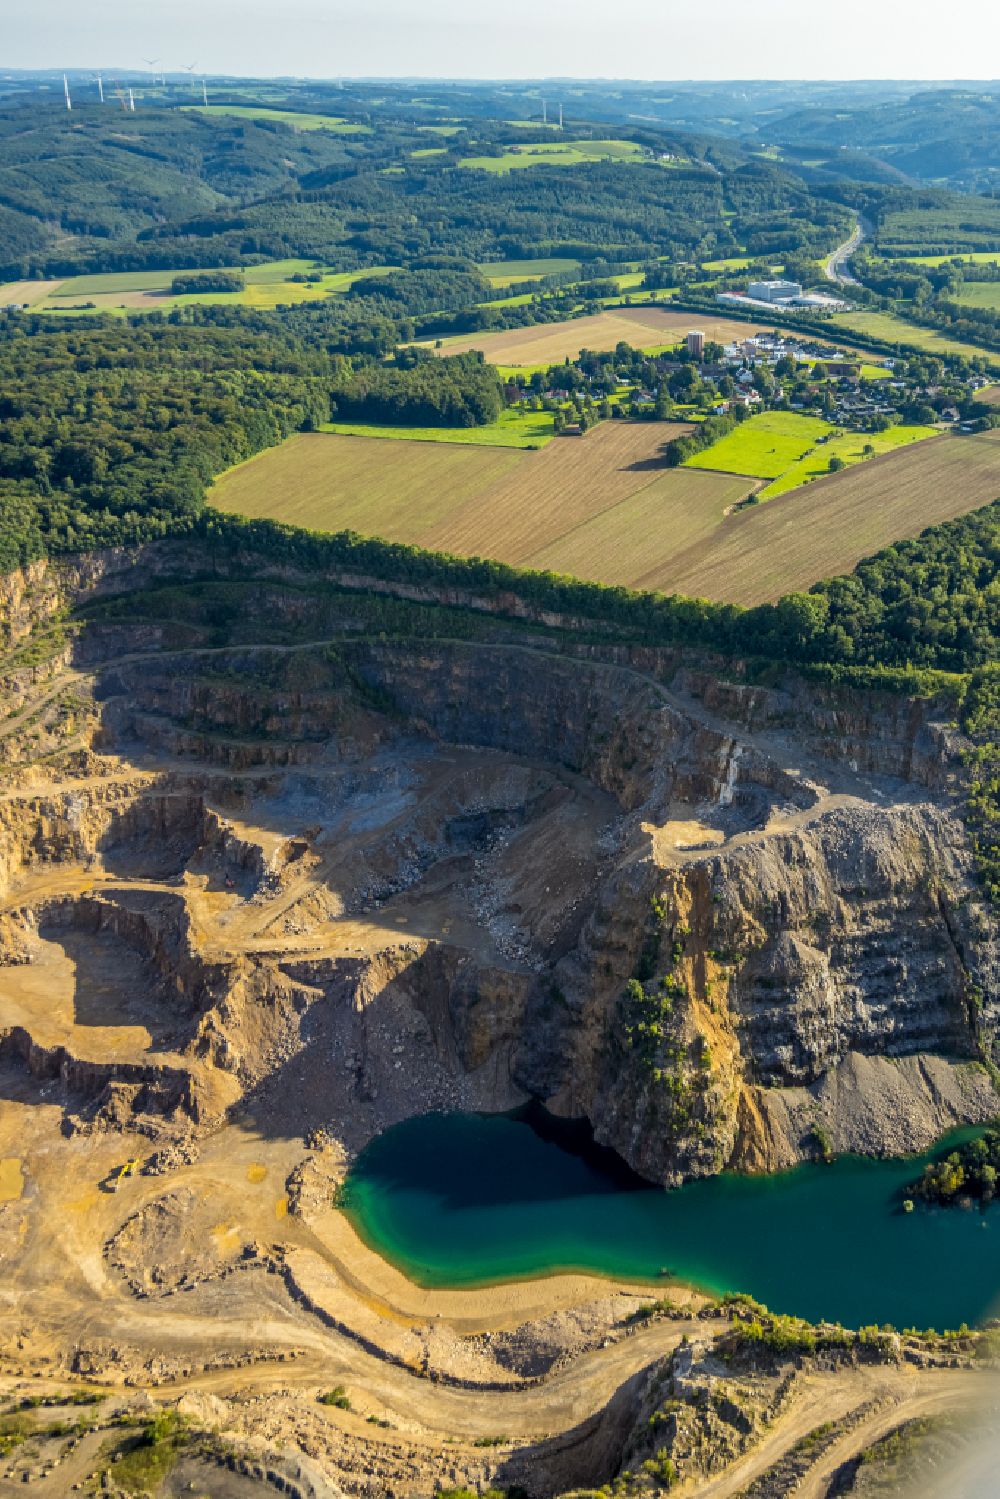 Hagen from the bird's eye view: Quarry for the mining and handling of sandstone in the district Herbeck in Hagen in the state North Rhine-Westphalia, Germany